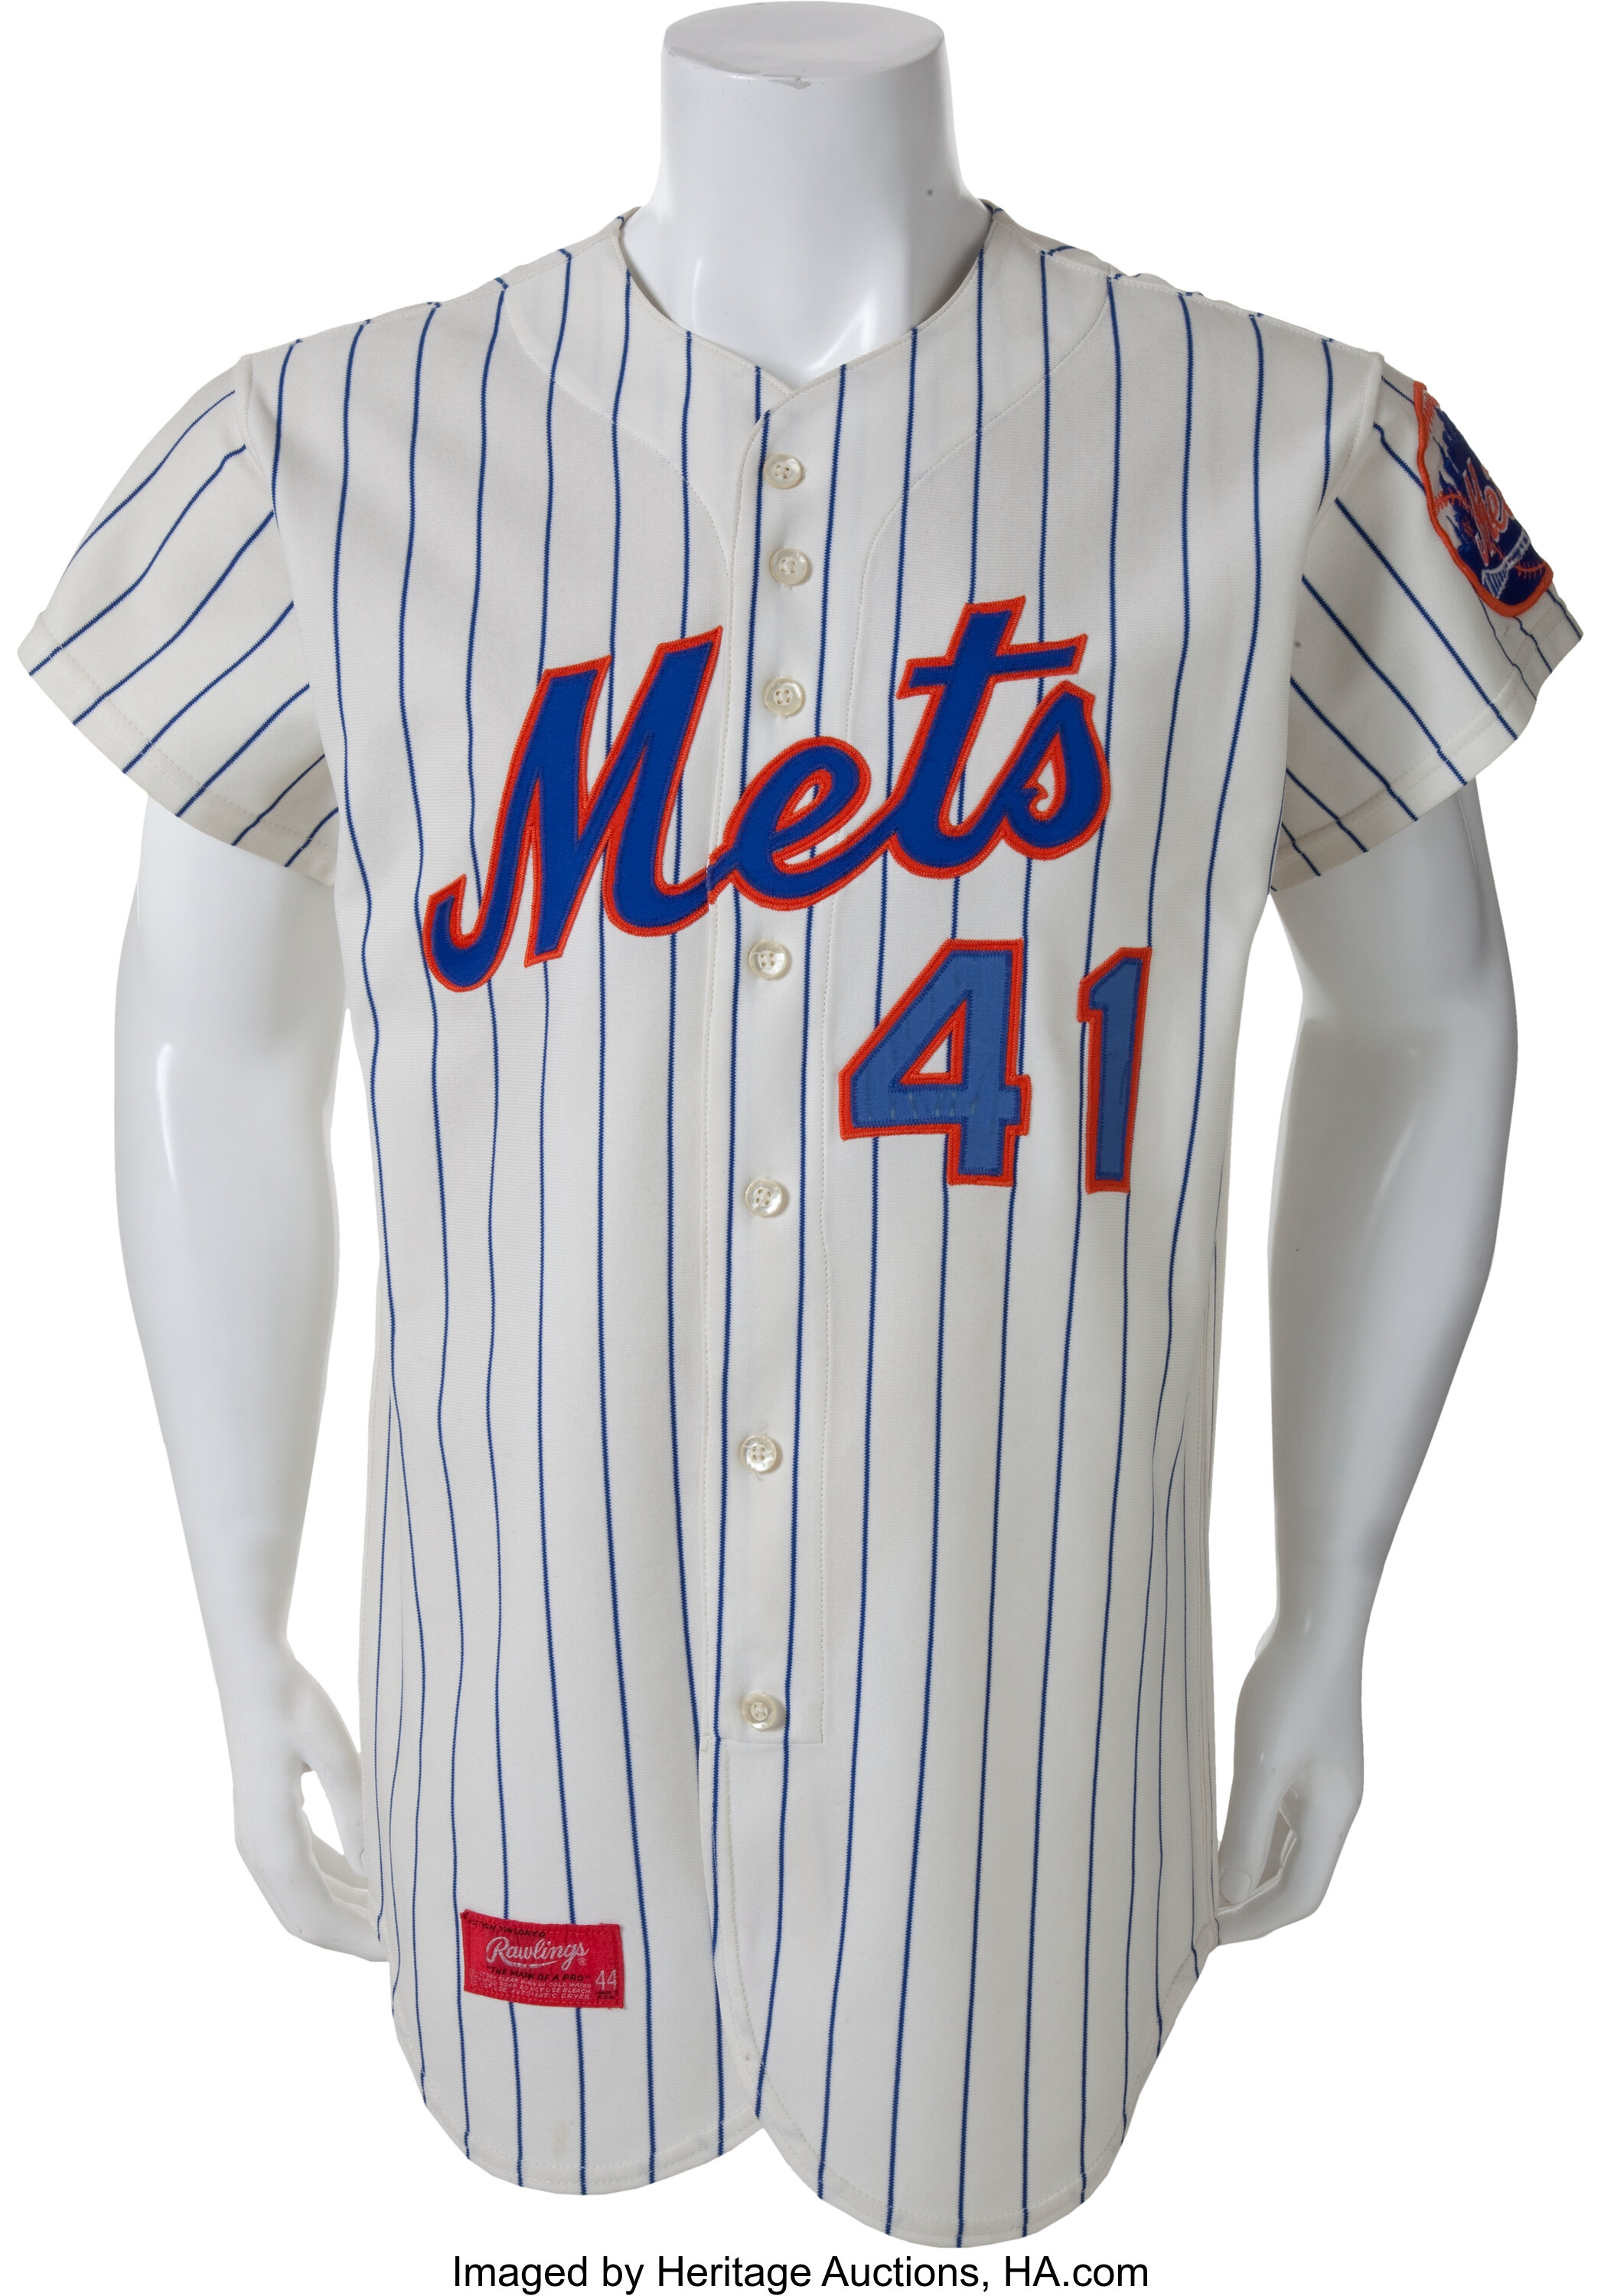 Tom Seaver Game Worn Road Jersey From 1972 - Mets History